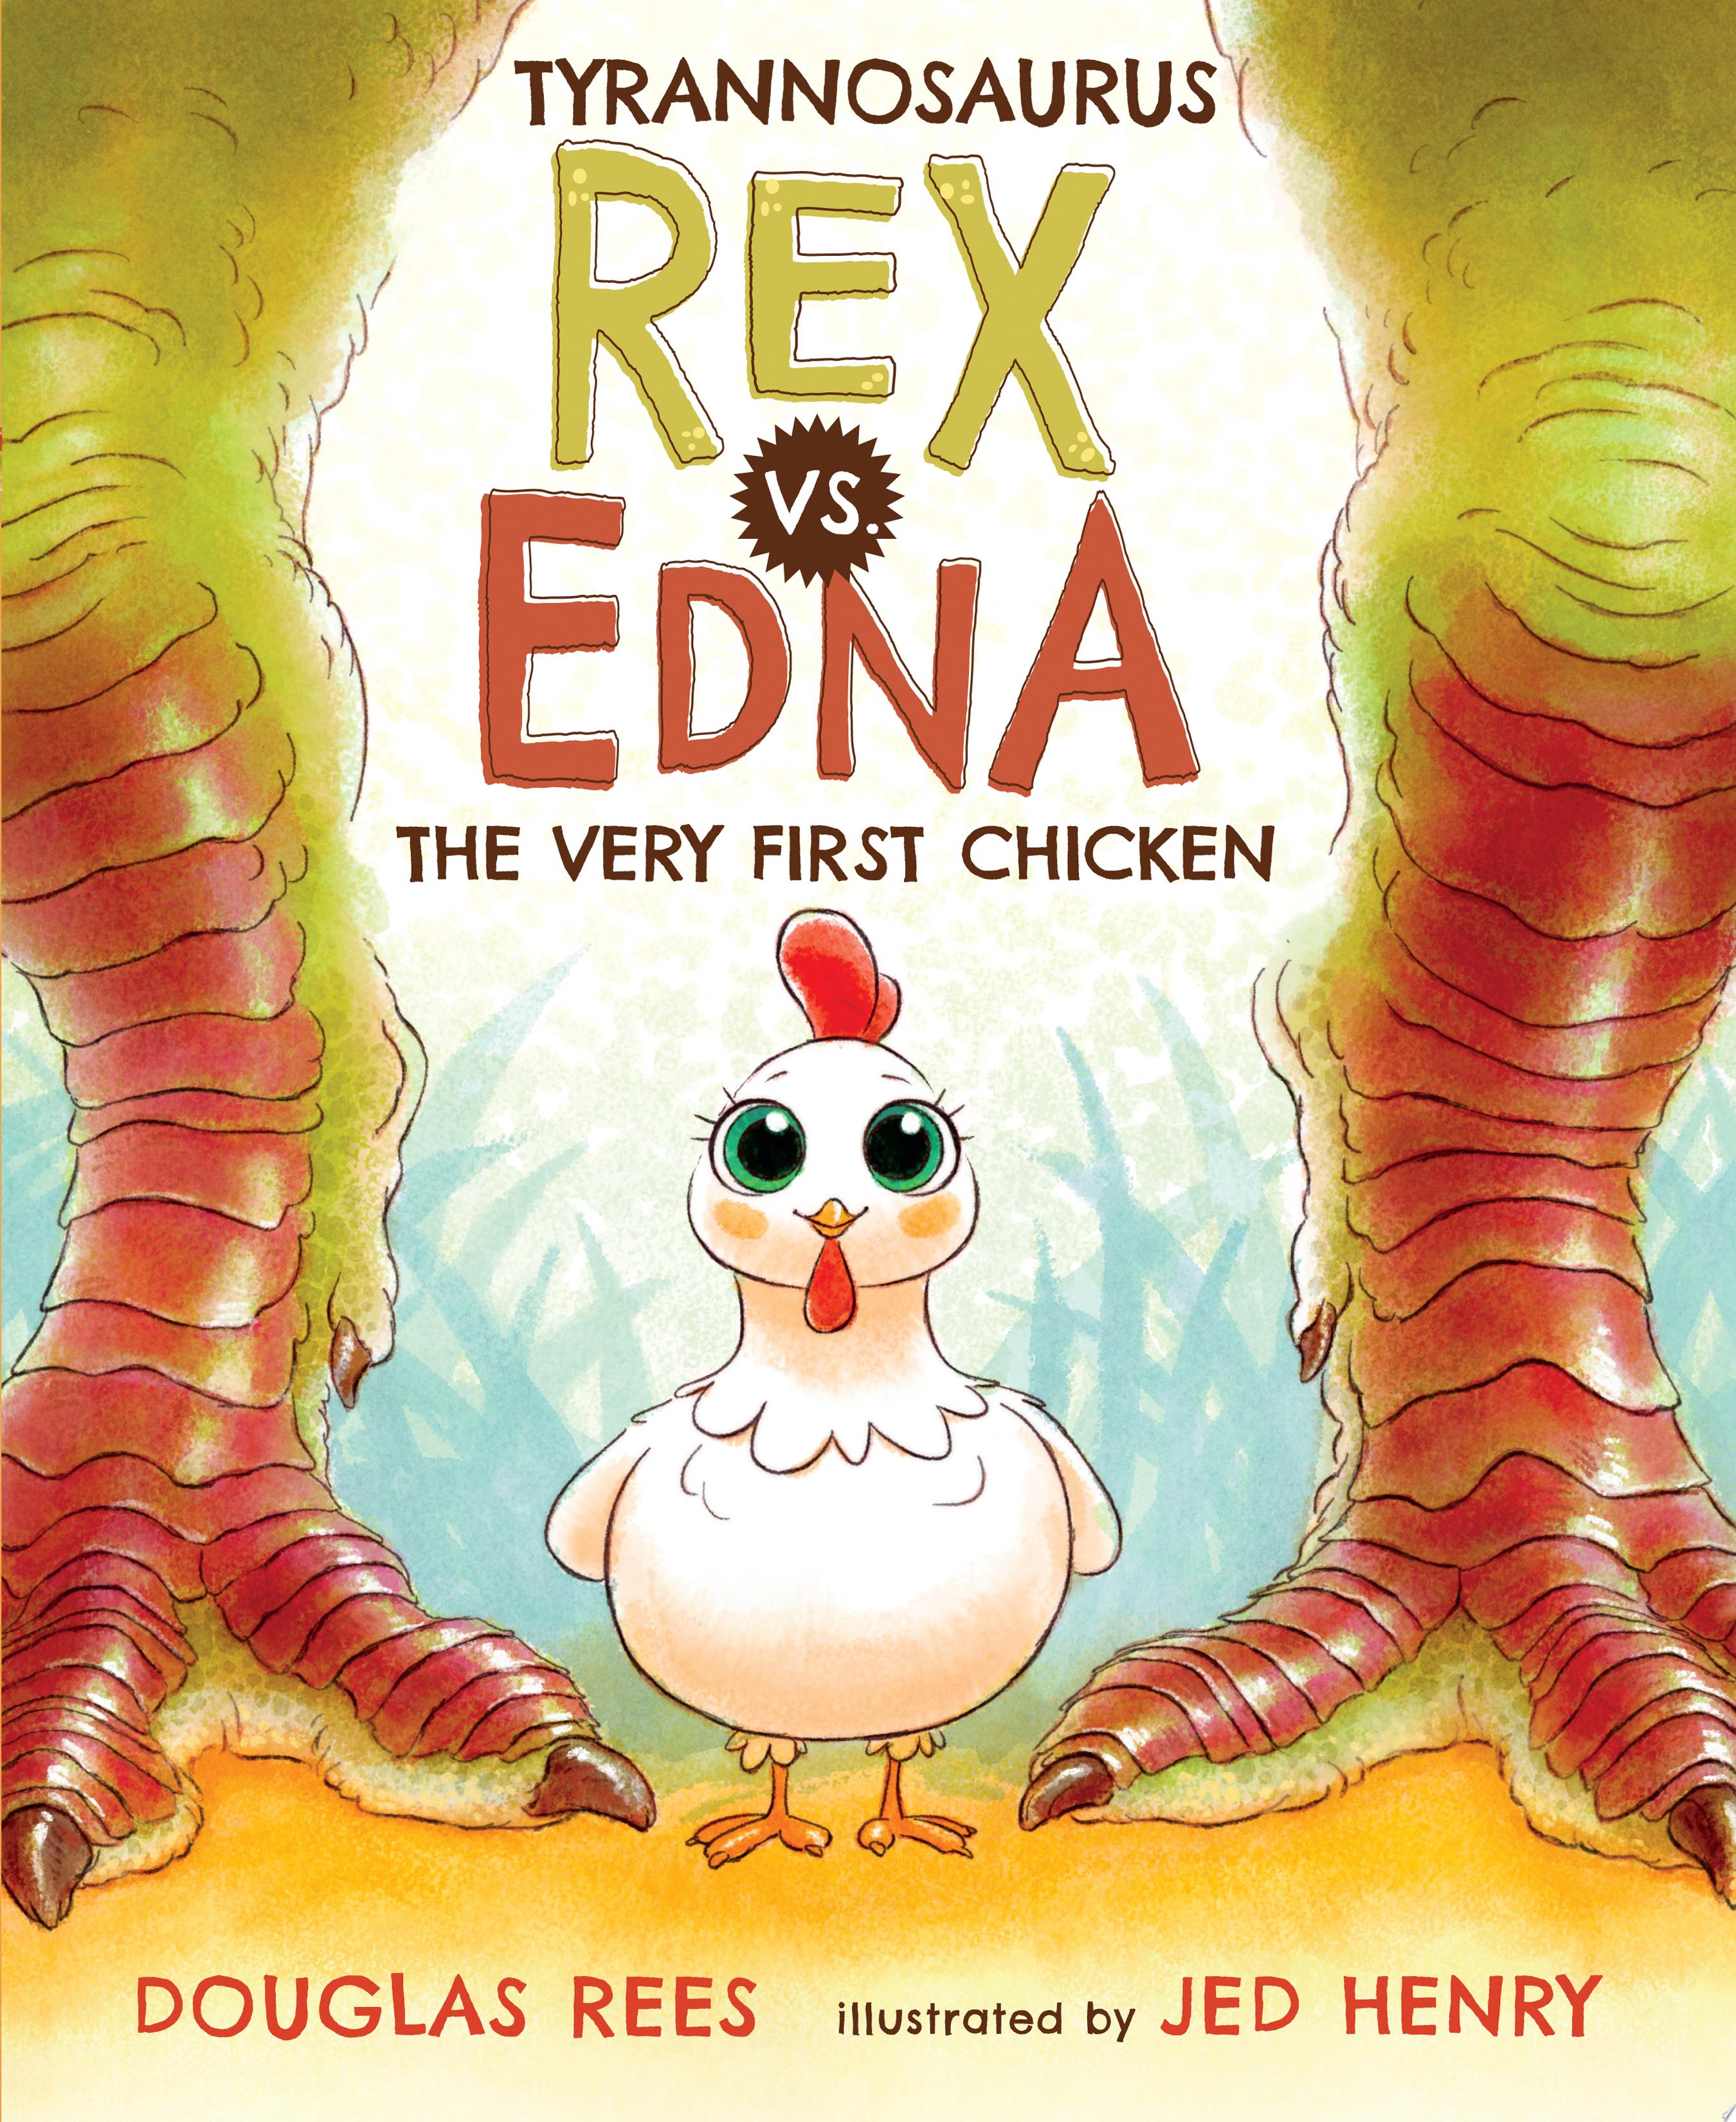 Image for "Tyrannosaurus Rex Vs. Edna the Very First Chicken"